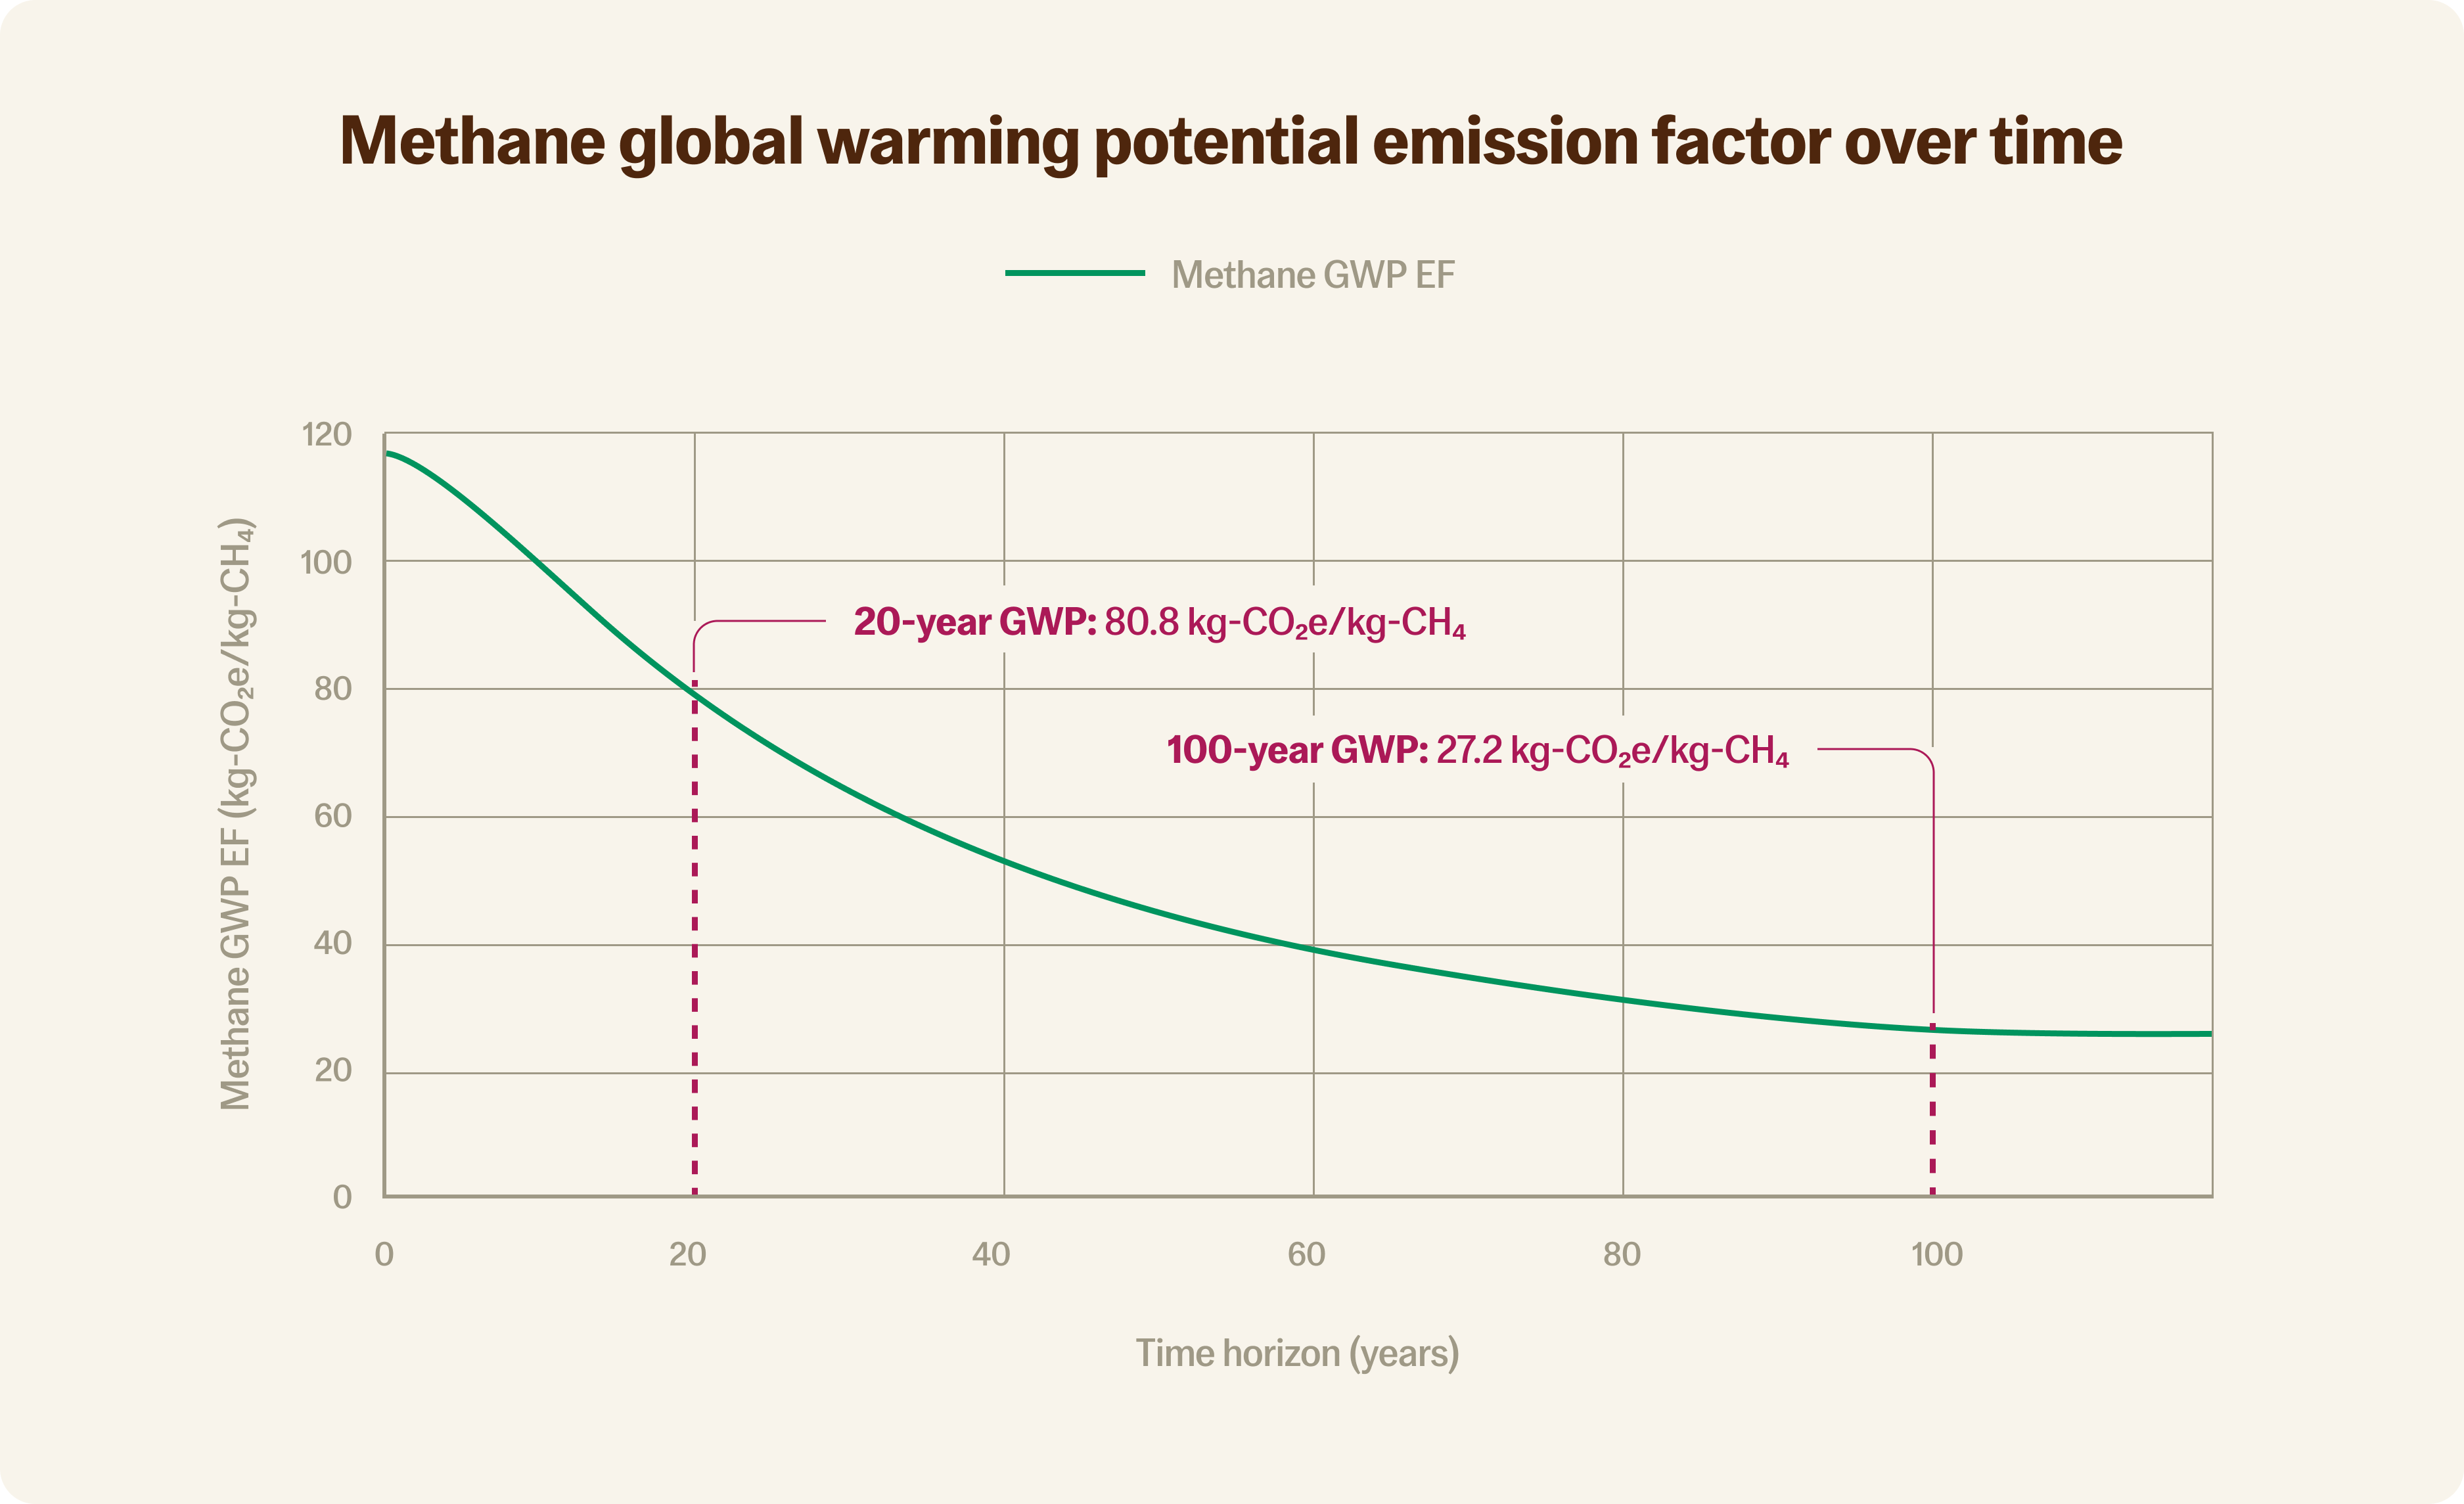 UPDATED 02.22_Methane global warming potential emission factor over time.png